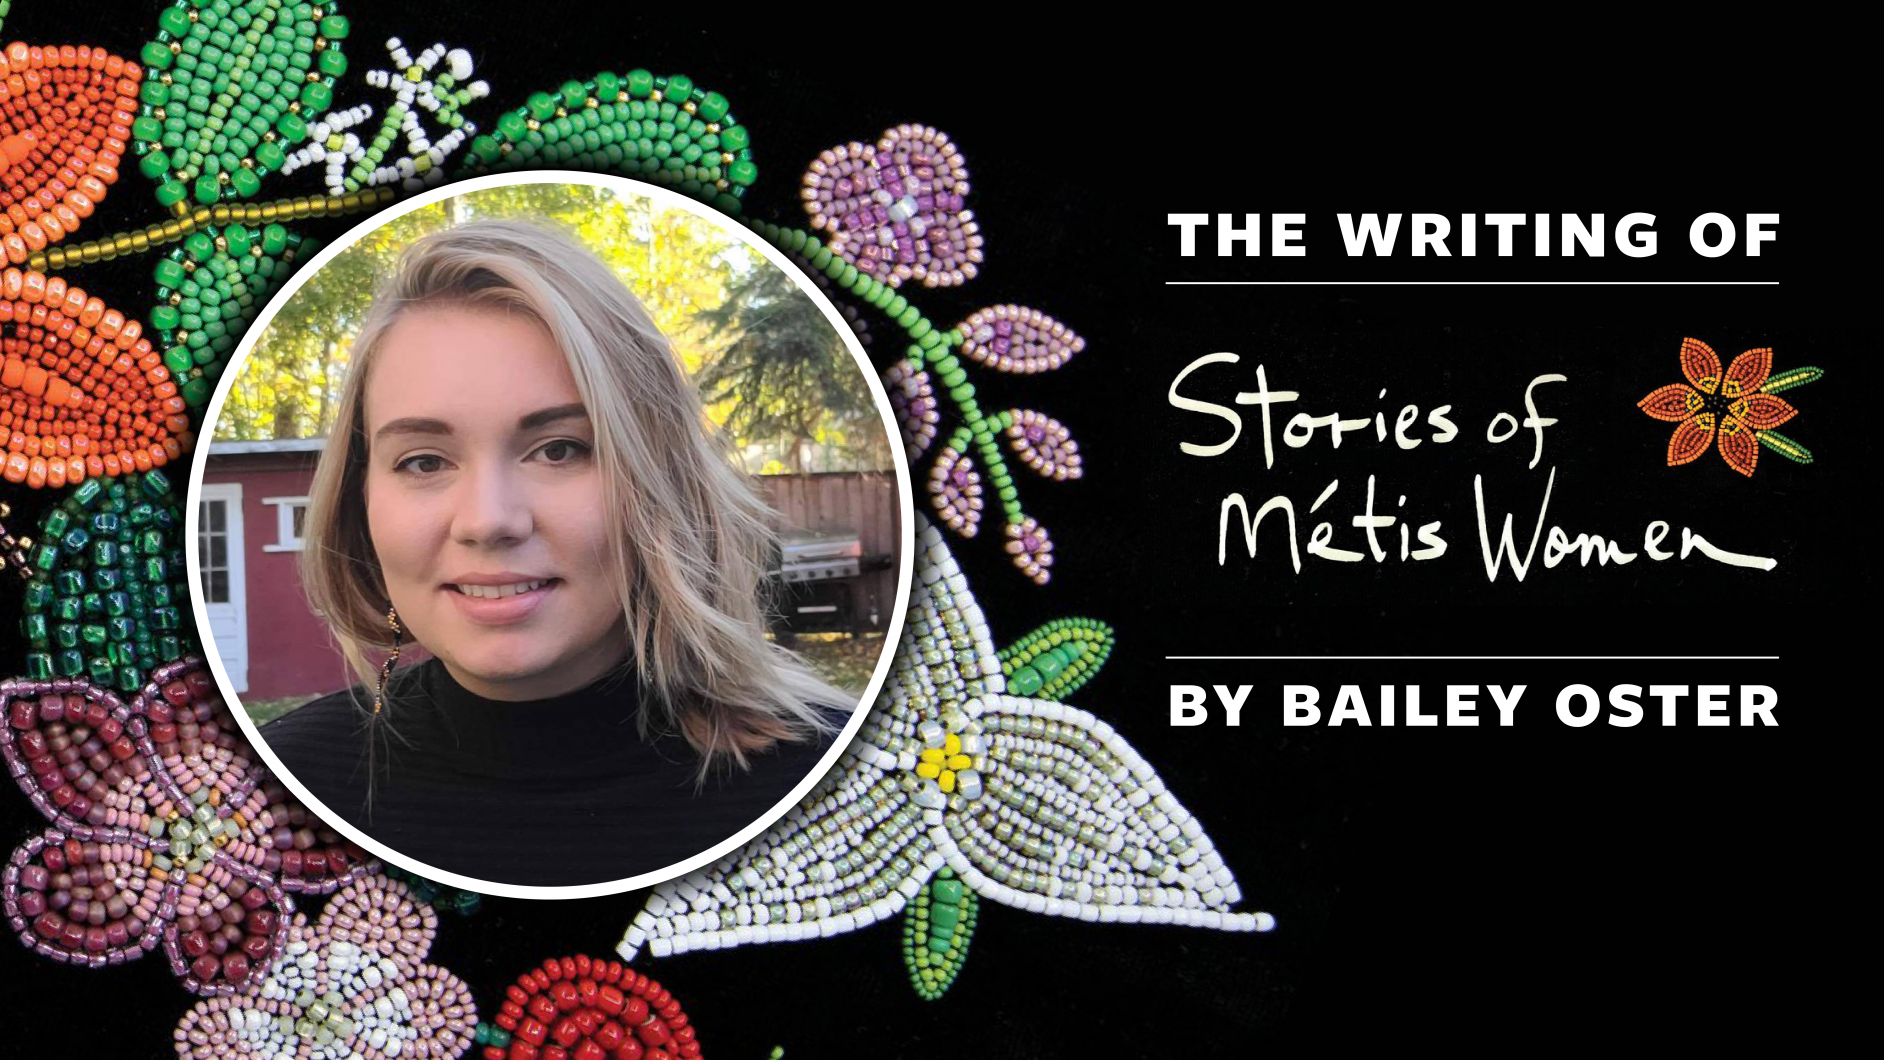 The Writing of Stories of Metis Women by Bailey Oster feature image